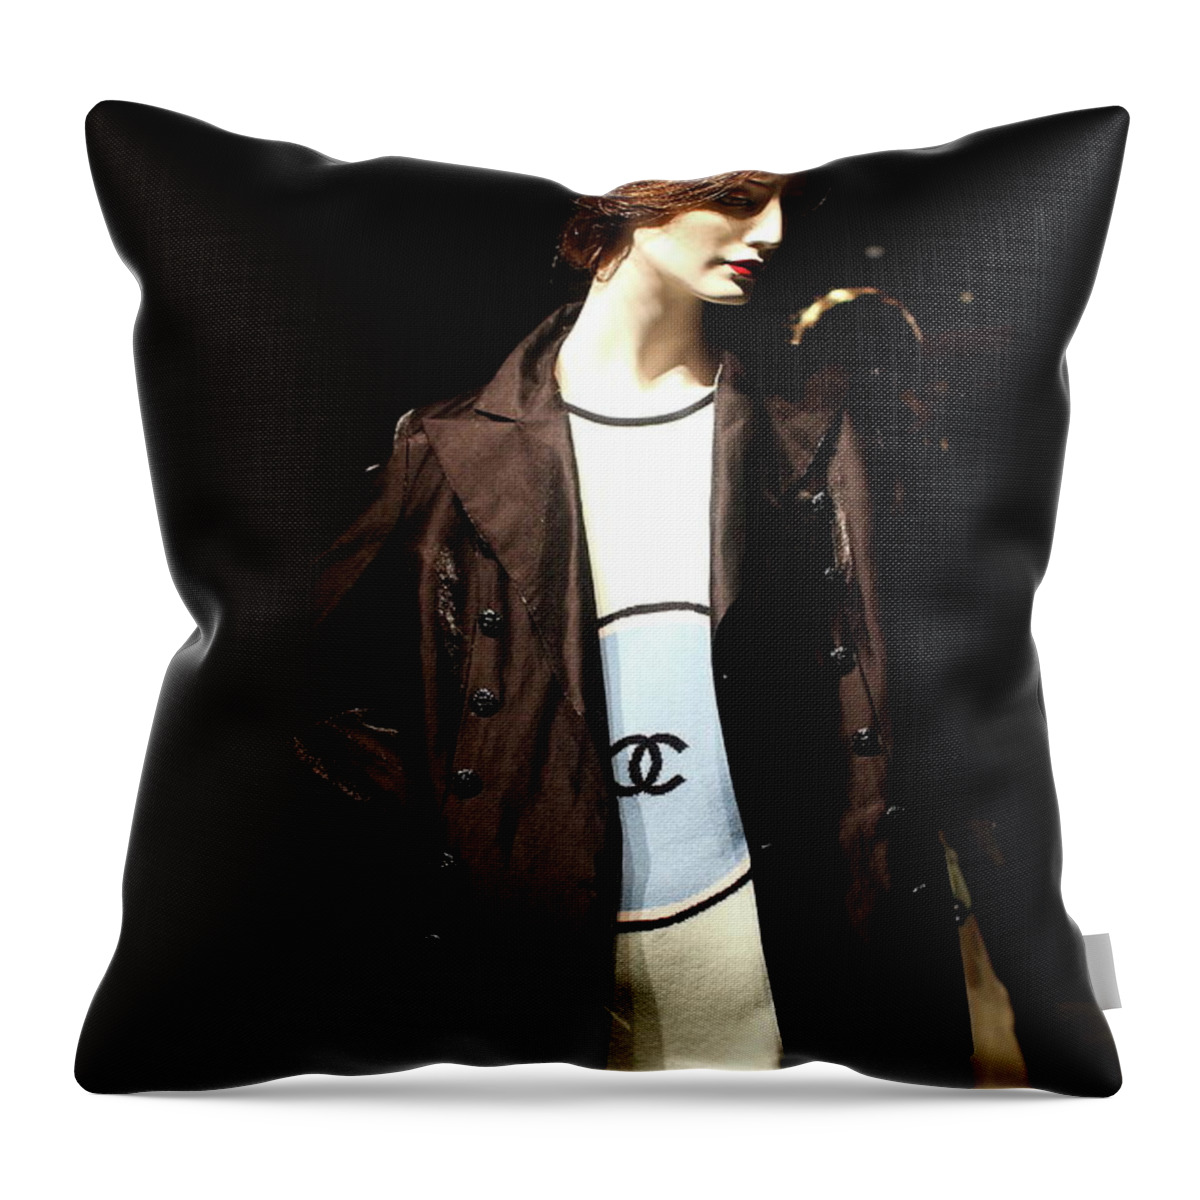 Mannequin Throw Pillow featuring the photograph The Display Mannequin . 40D3533 by Wingsdomain Art and Photography